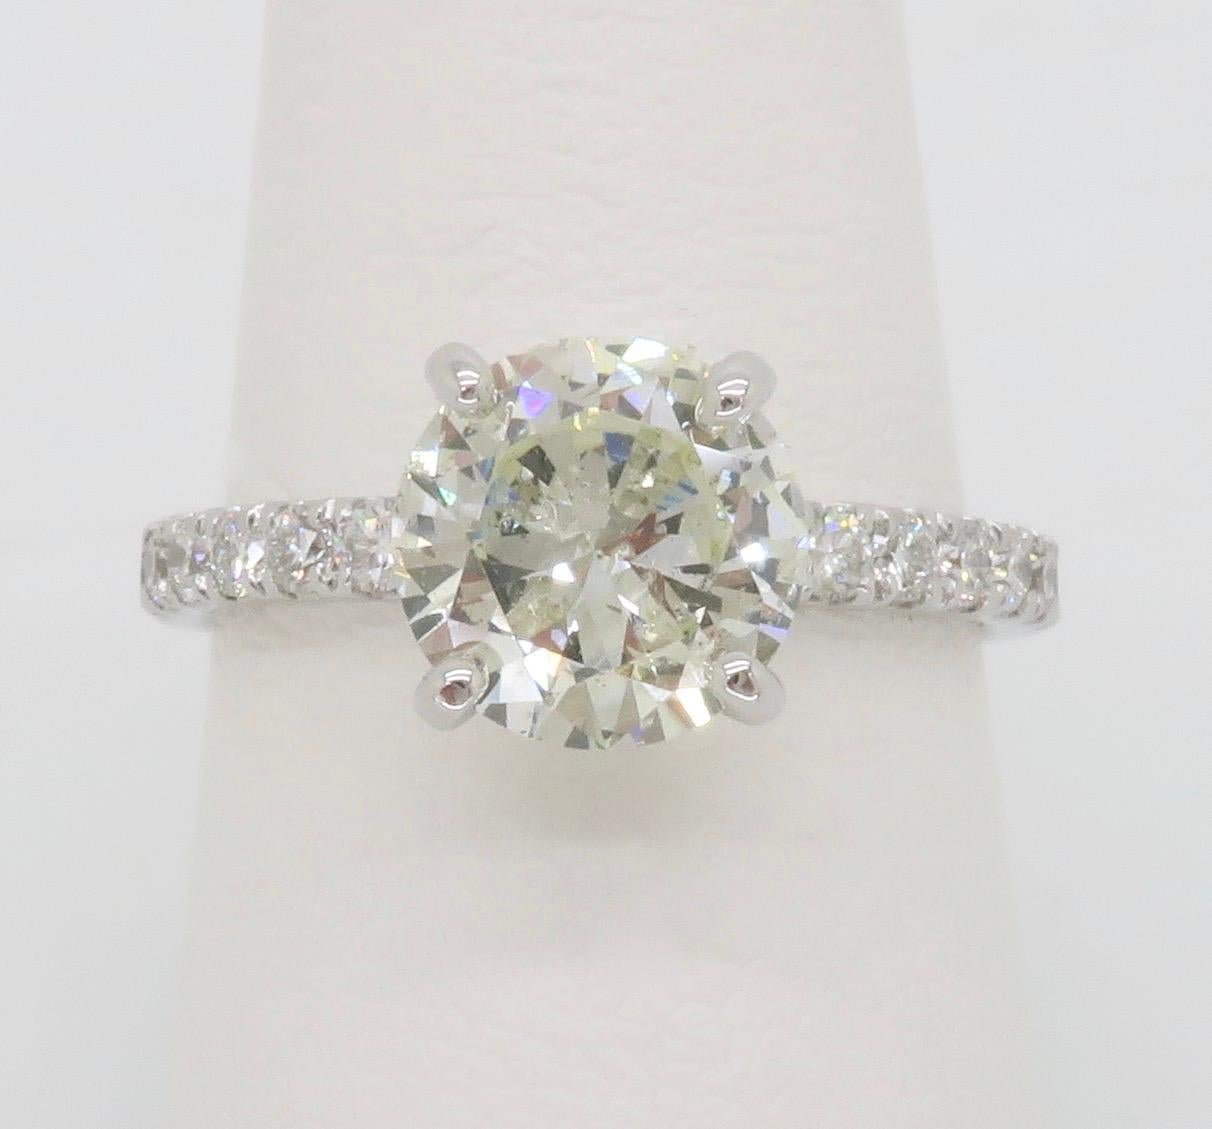 Beautiful 2.21CTW Diamond engagement ring set in 14k white gold. 

Center Diamond Carat Weight: 1.73CT
Center Diamond Cut: Round Brilliant cut 
Center Diamond Color: K
Center Diamond Clarity: I1 - Clarity Enhanced with laser drill
Accent Diamond